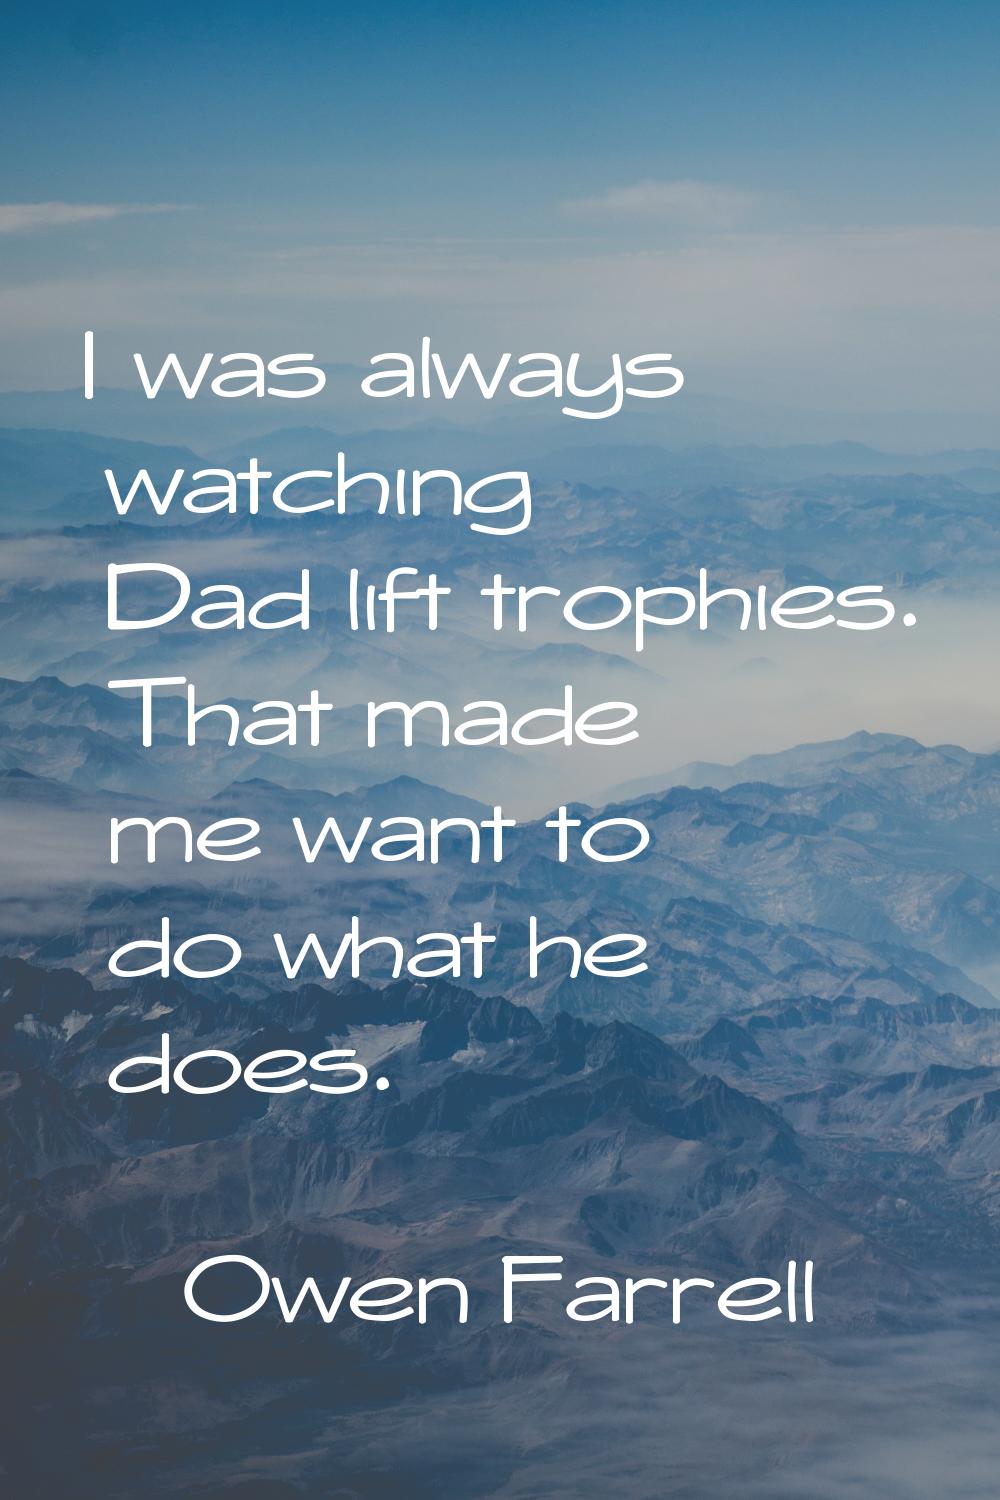 I was always watching Dad lift trophies. That made me want to do what he does.